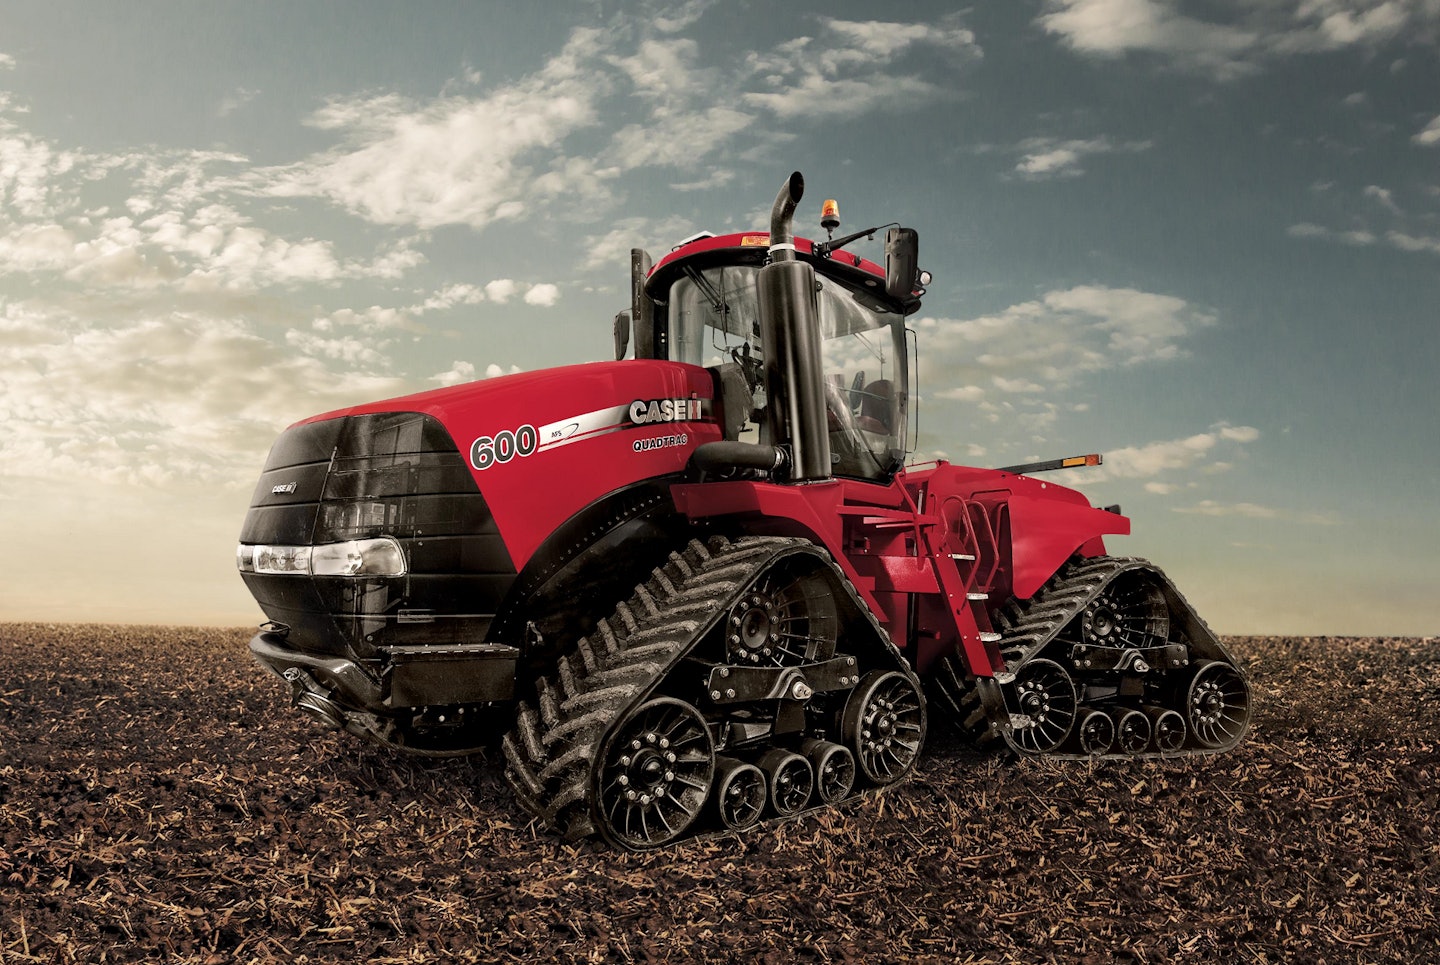 The Steiger 600 is available in a wheeled or four-track configuration.